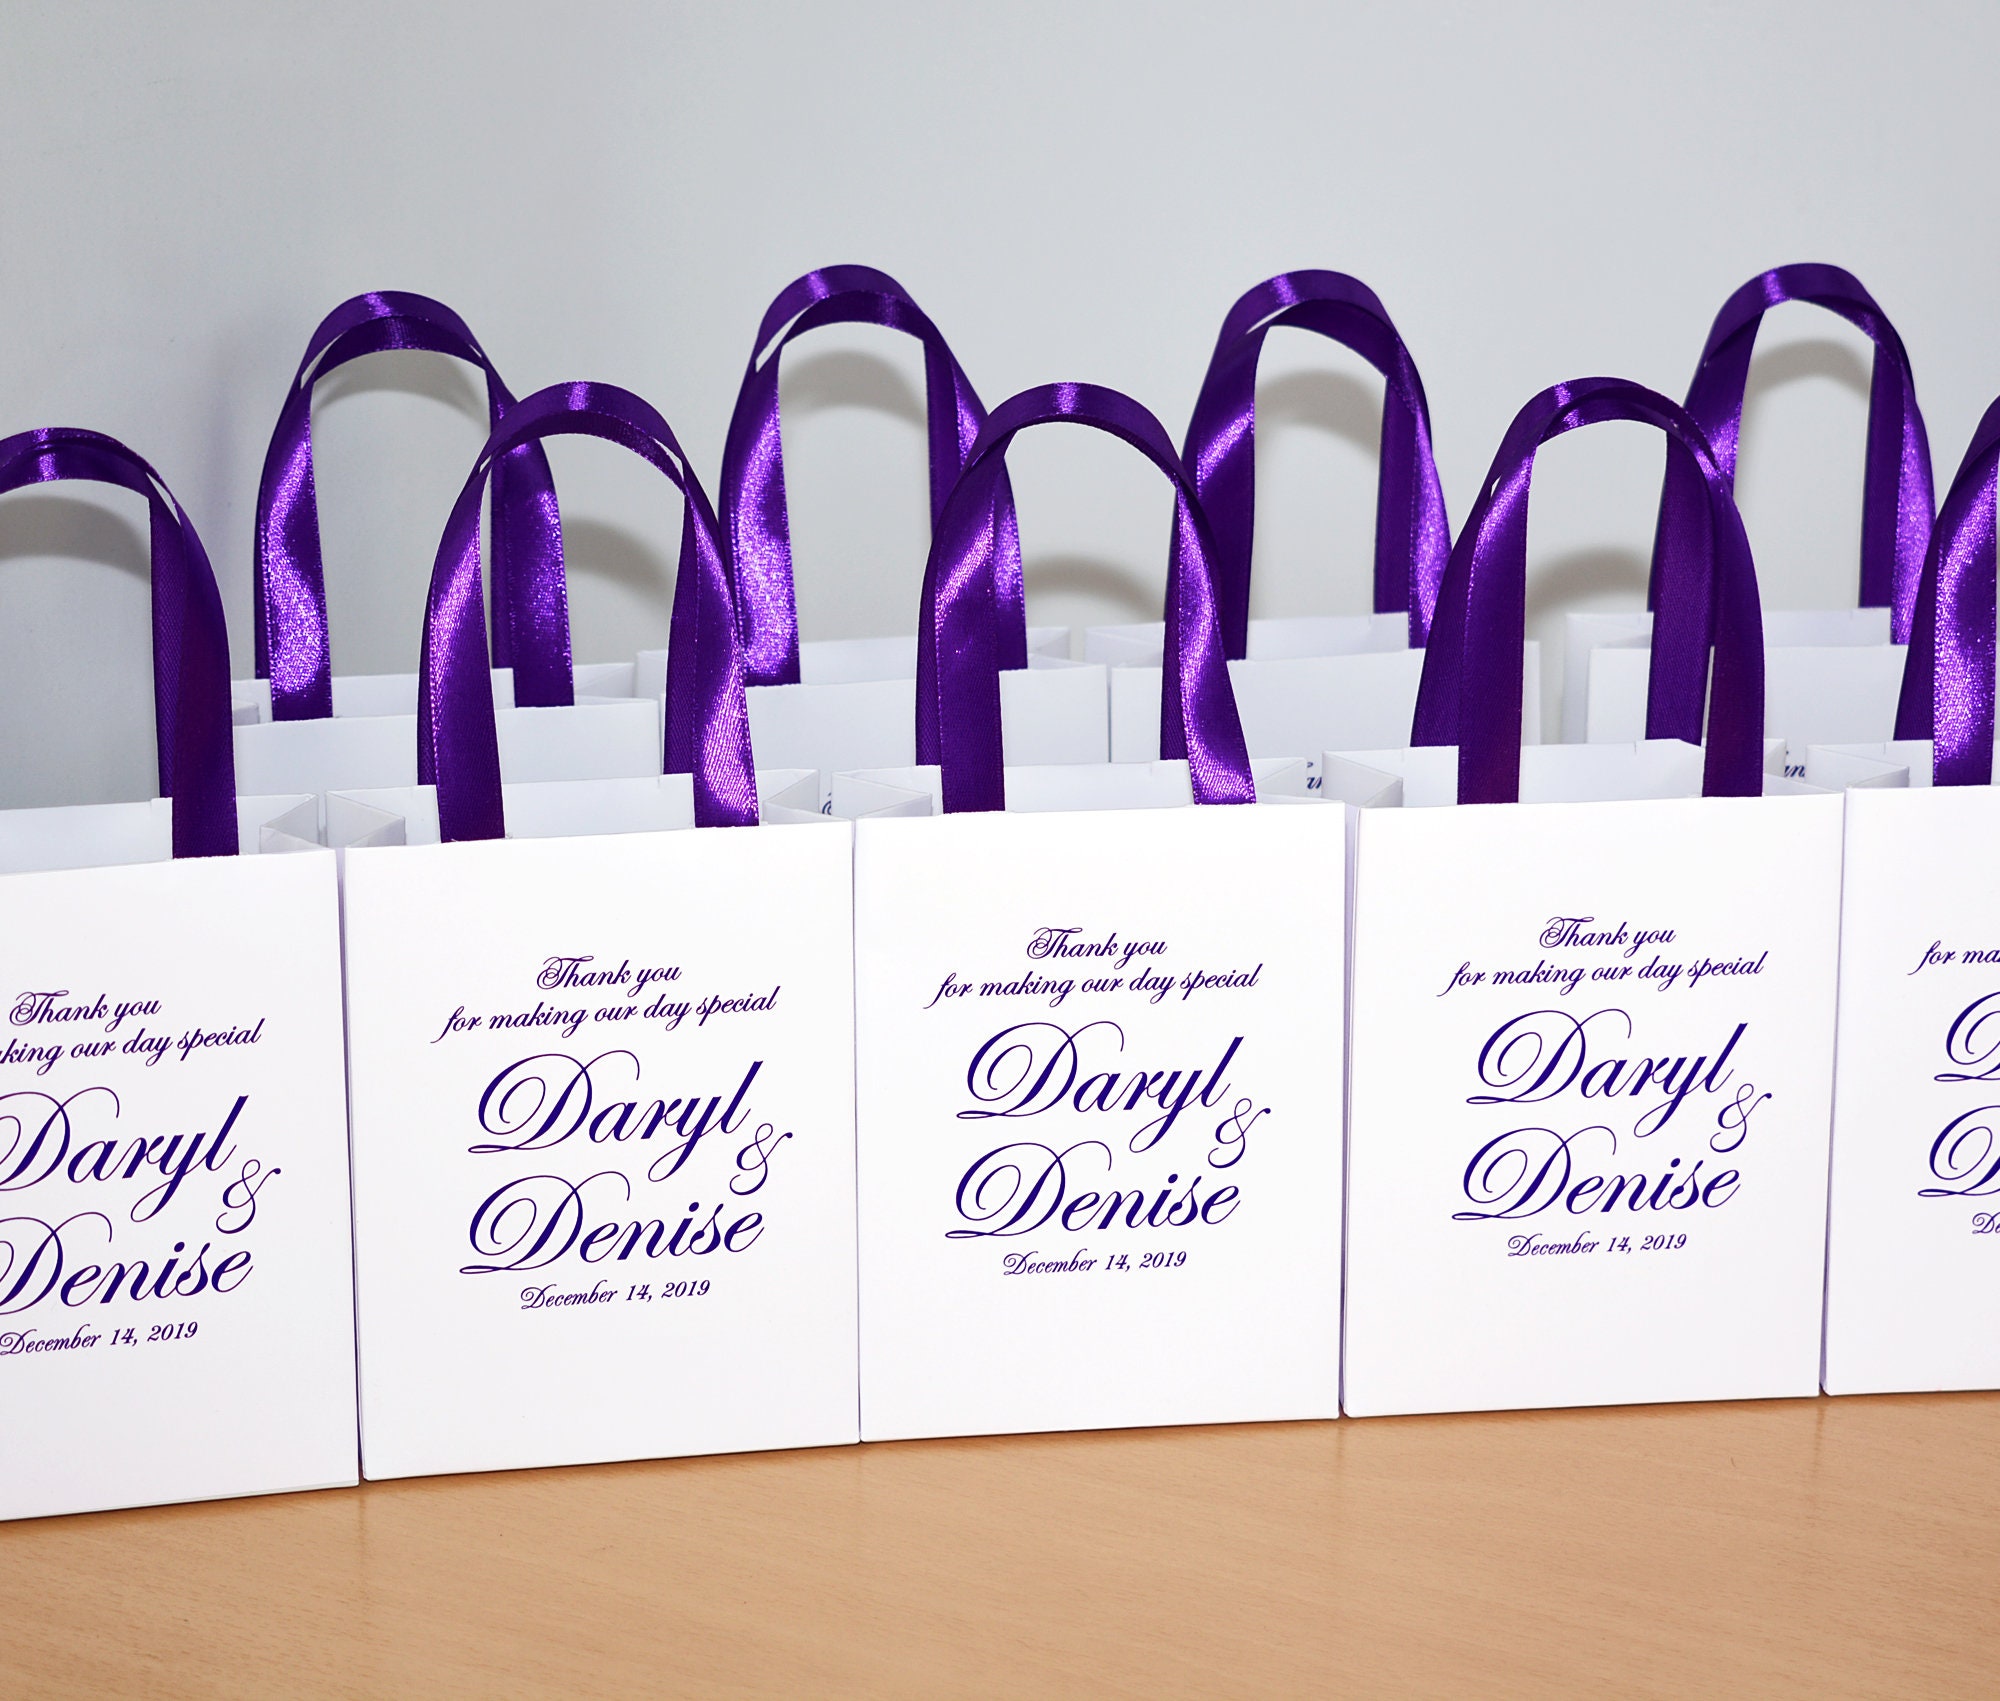 25 Purple Wedding Welcome Bags for Favor for Guests, Elegant